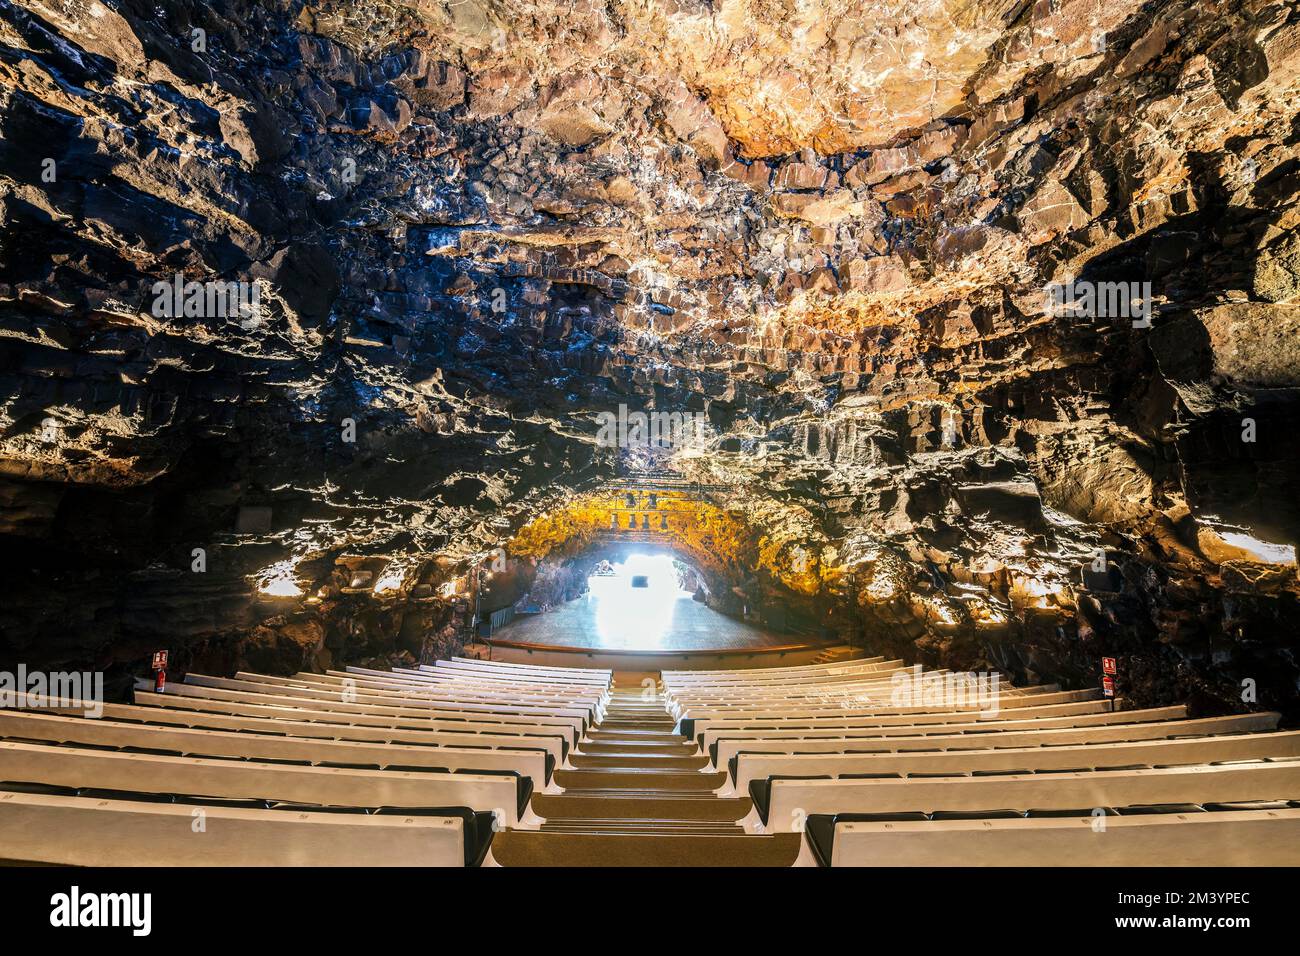 Amazing cave, pool, natural auditorium, salty lake designed by Cesar Manrique in volcanic tunnel called Jameos del Agua in Lanzarote, Canary Islands Stock Photo